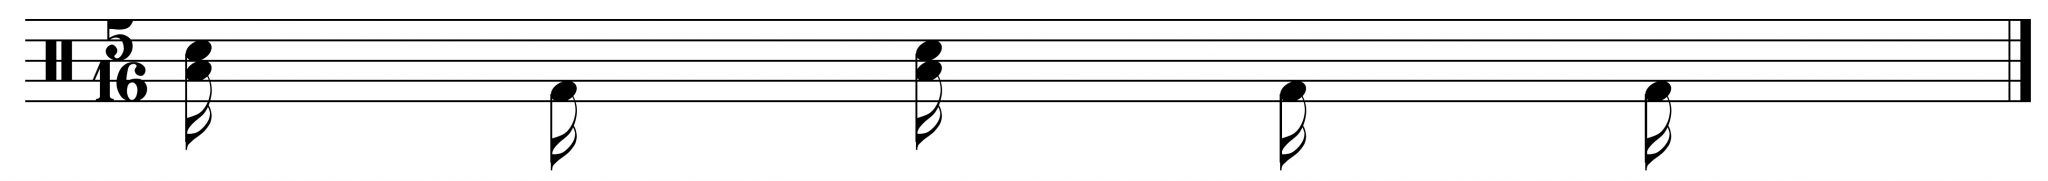 the five notes